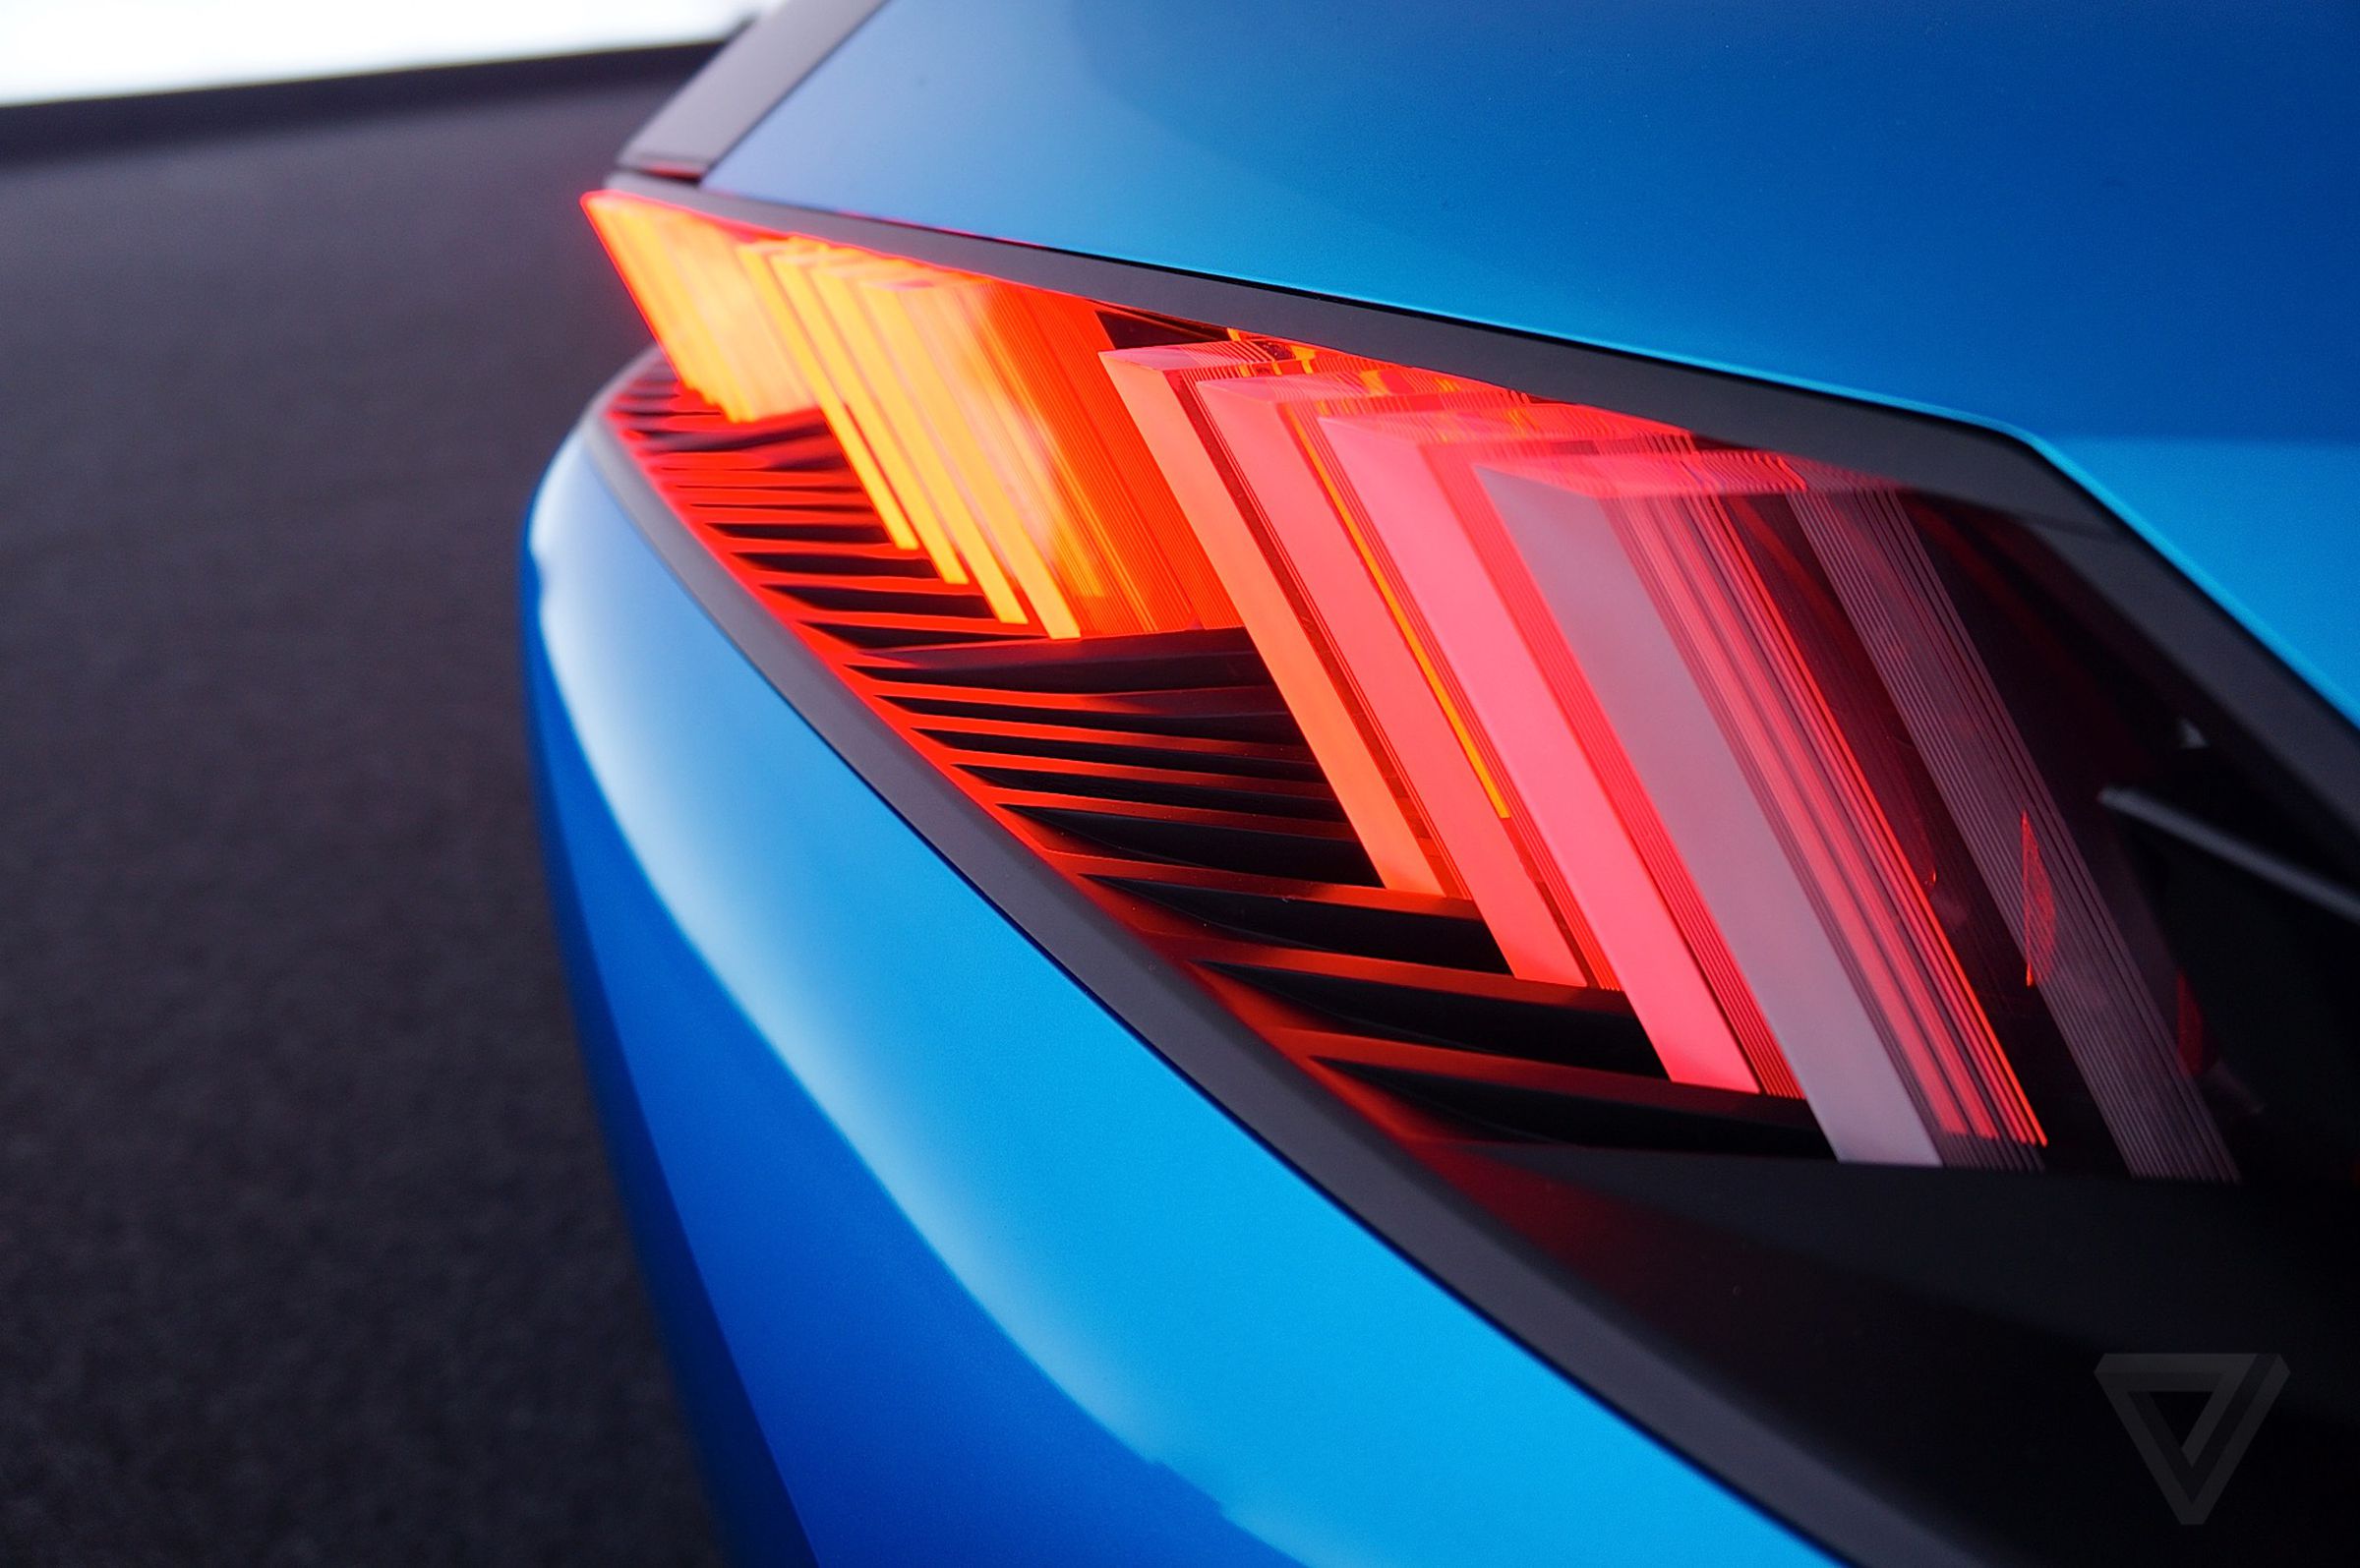 The taillights adopt the same linear pattern found throughout the car’s interior and exterior.